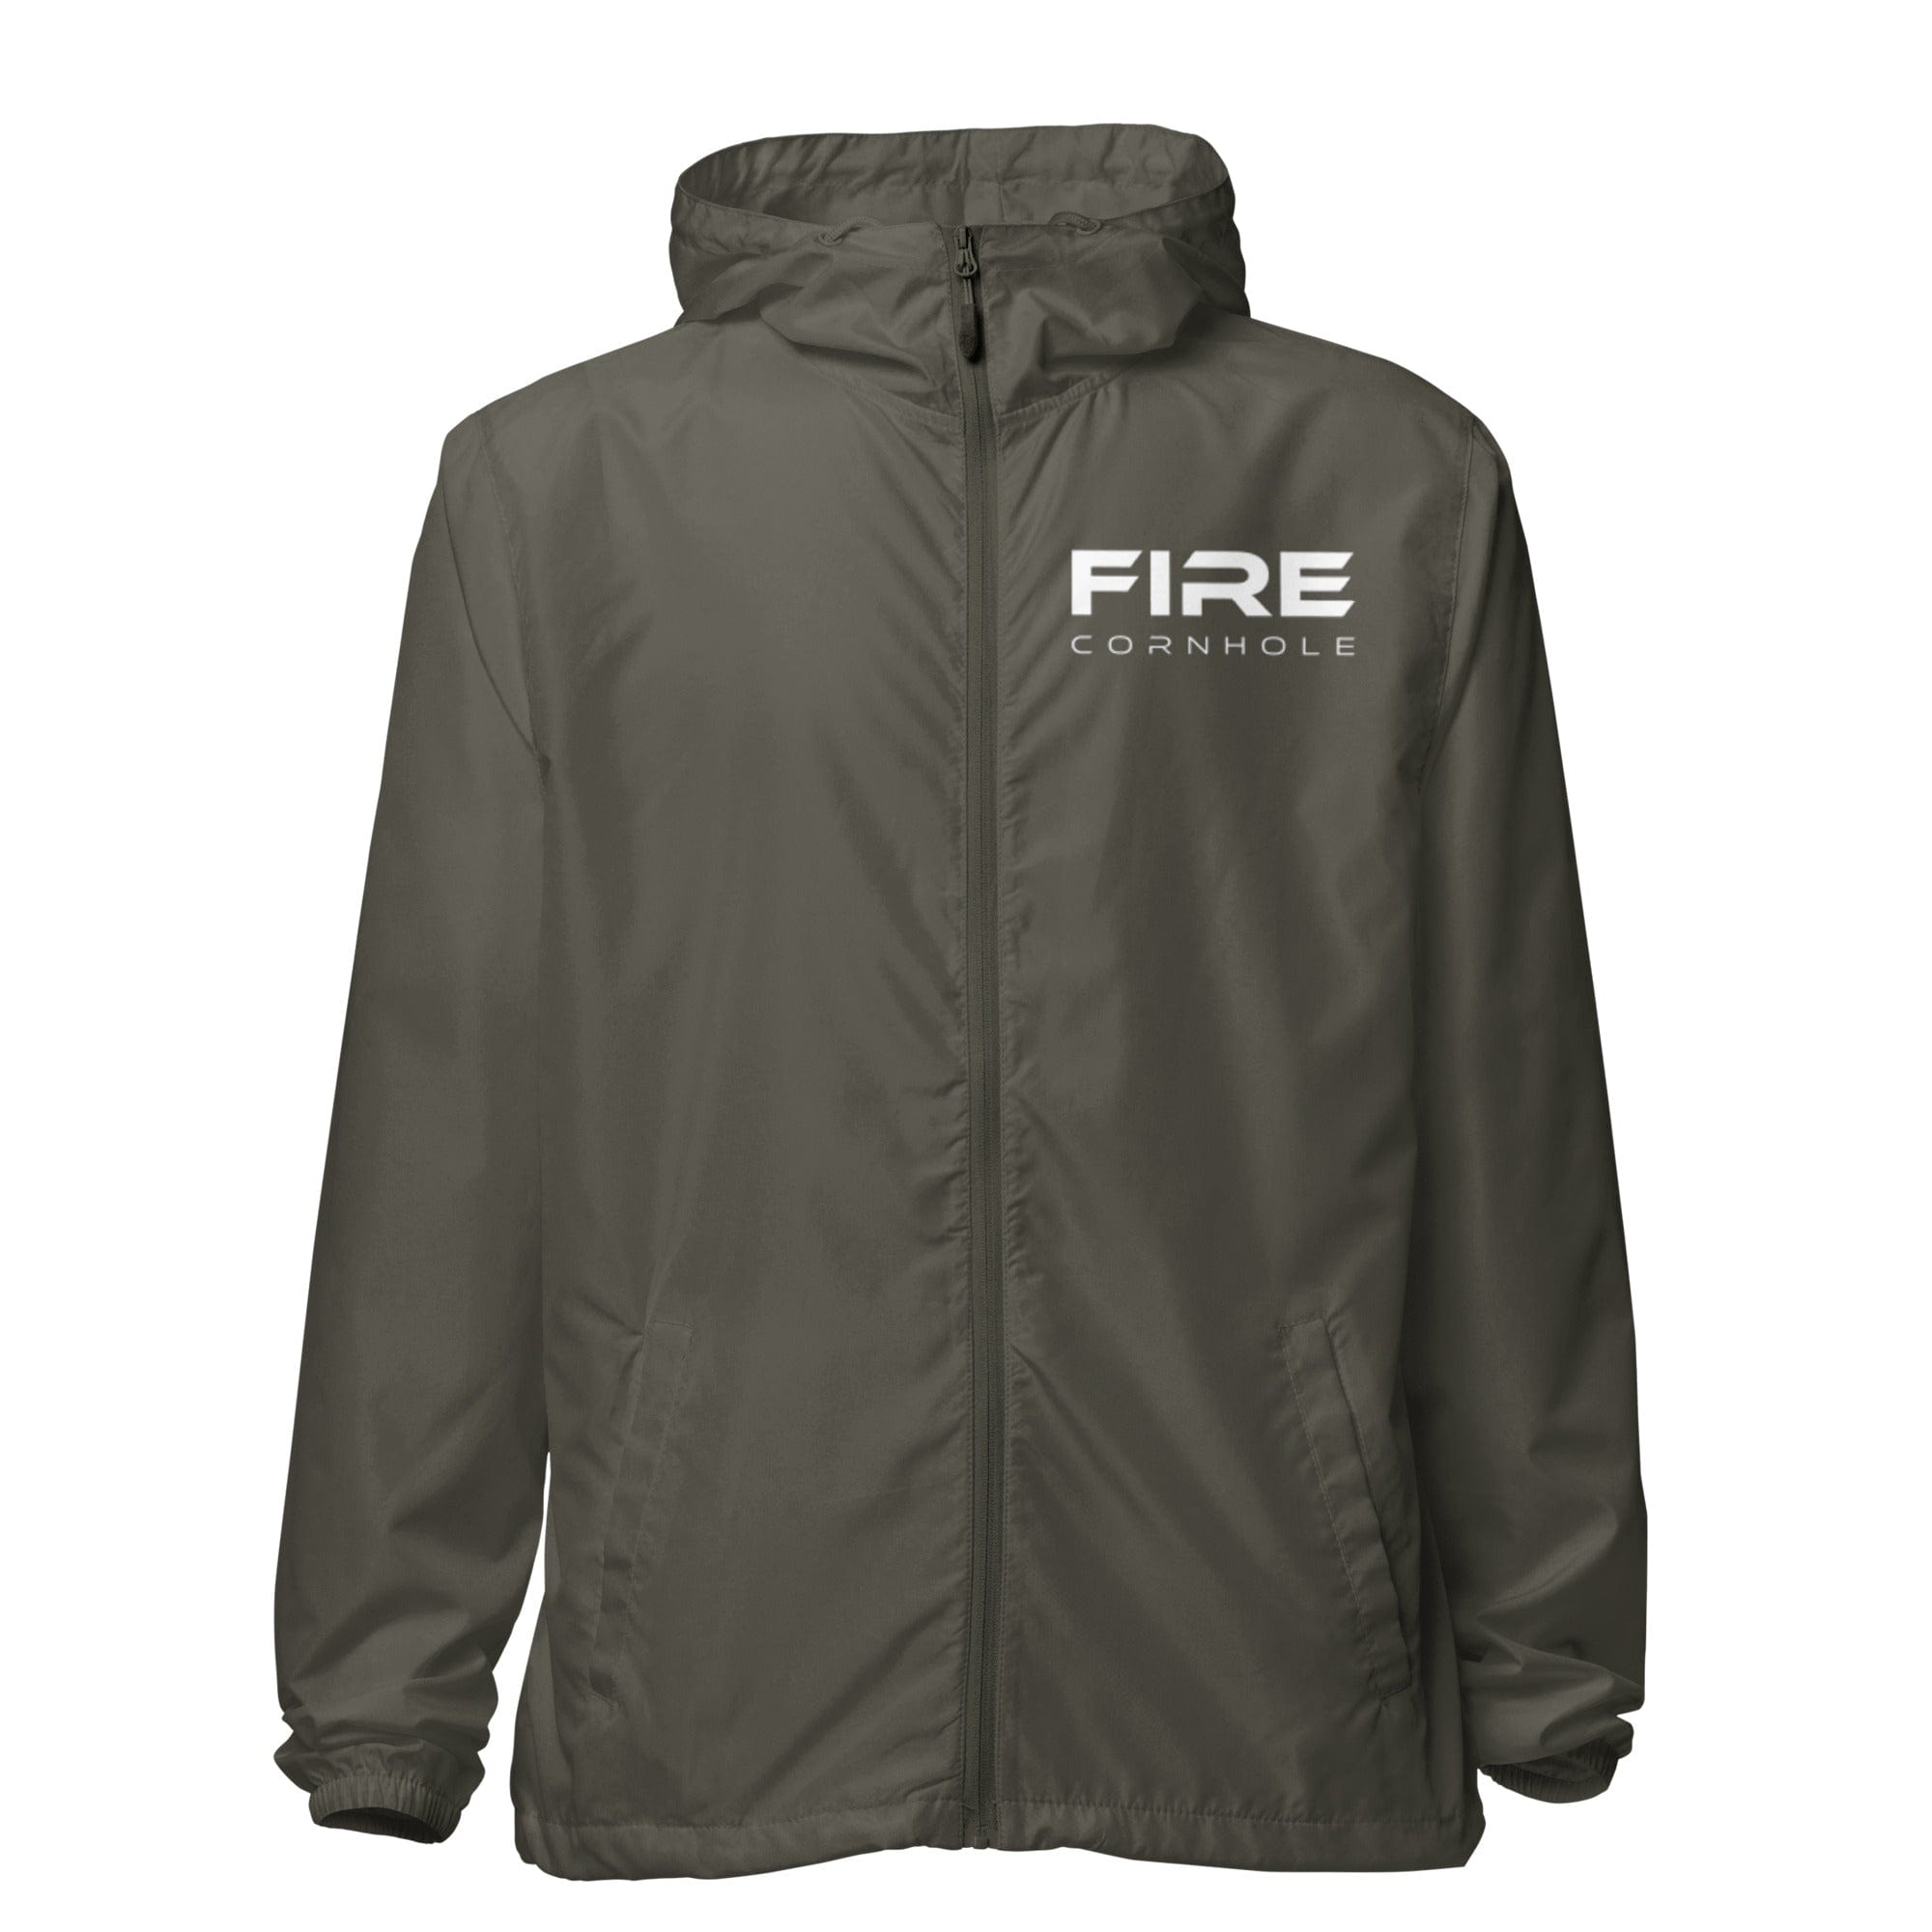 Front view of grey unisex zip-up windbreaker with Fire cornhole logo in white